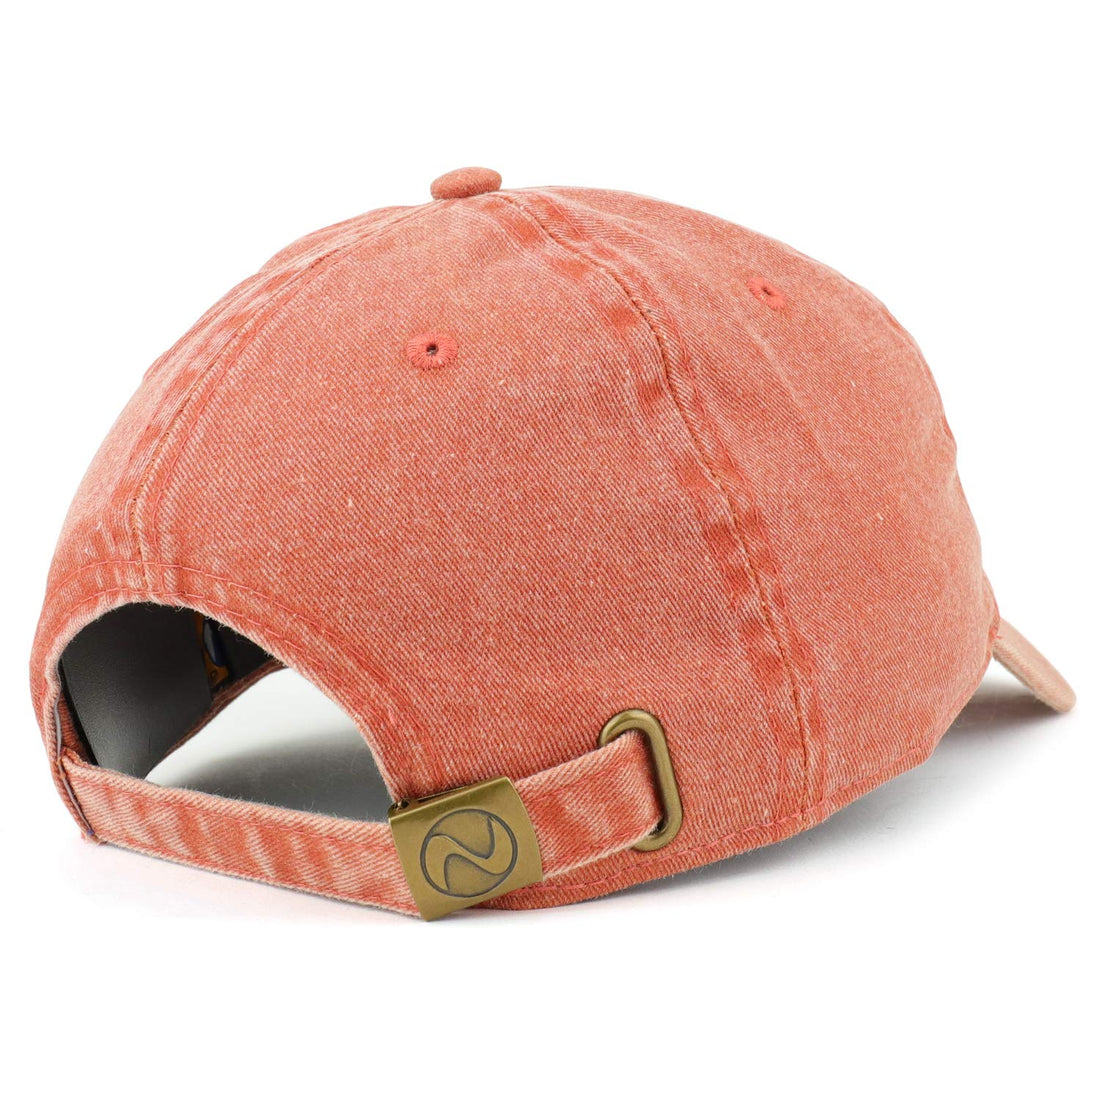 Trendy Apparel Shop Orange Patch Pigment Dyed Washed Baseball Cap